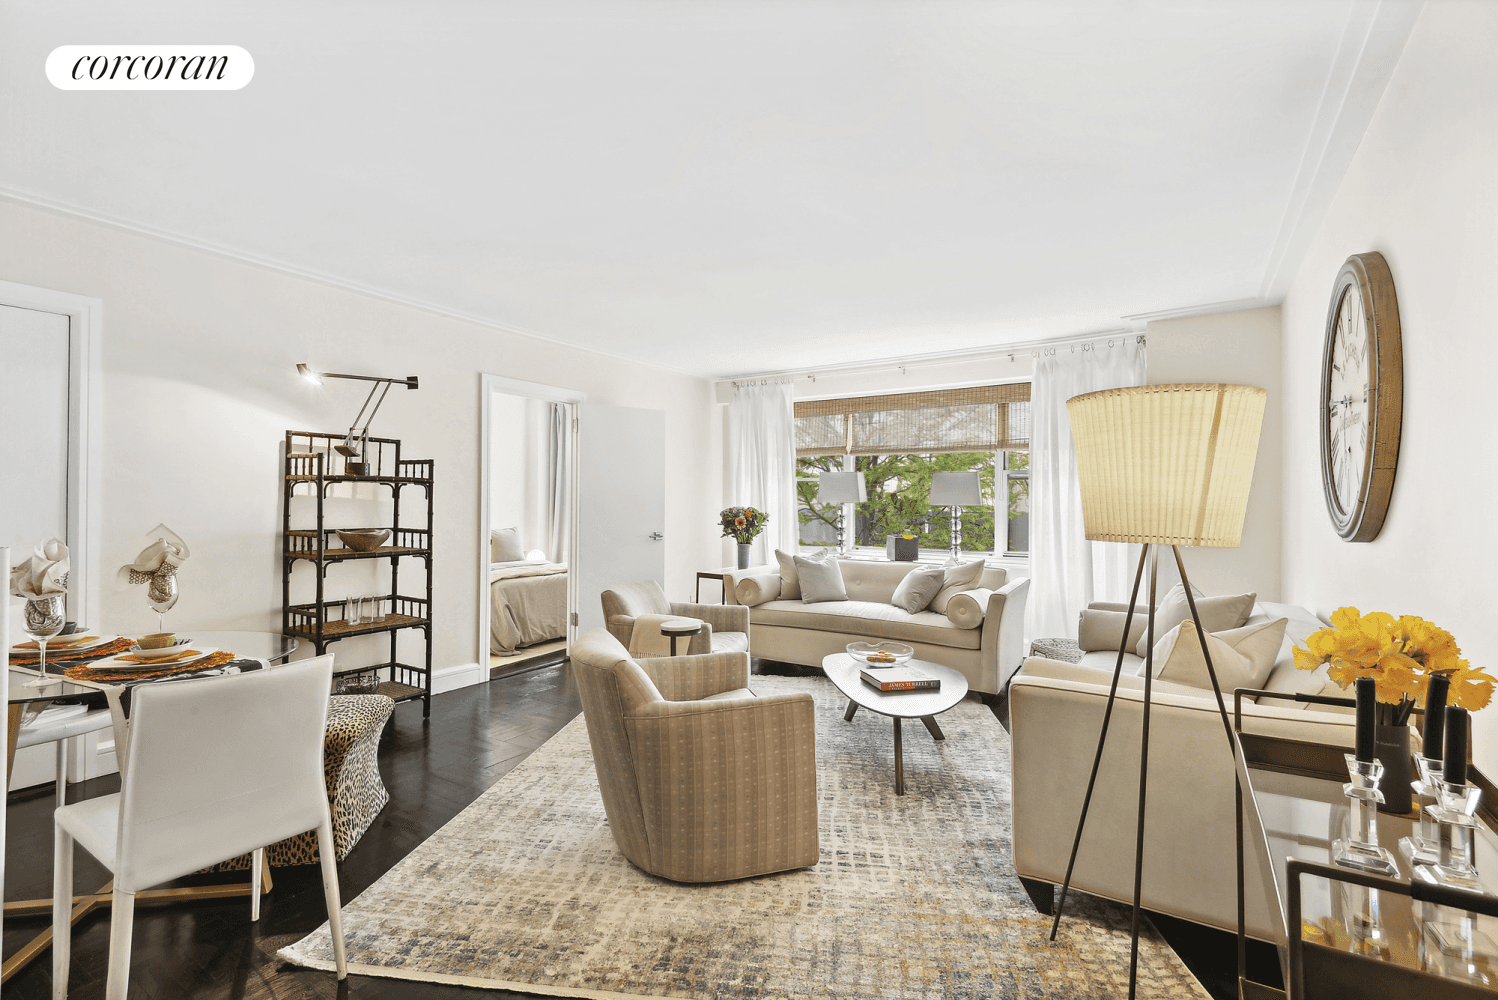 150 East 61st Street 4AWelcome to 150 East 61st Street 4A a charming junior 1 bedroom residence, perfectly situated at a prestige location on the Upper East Side.